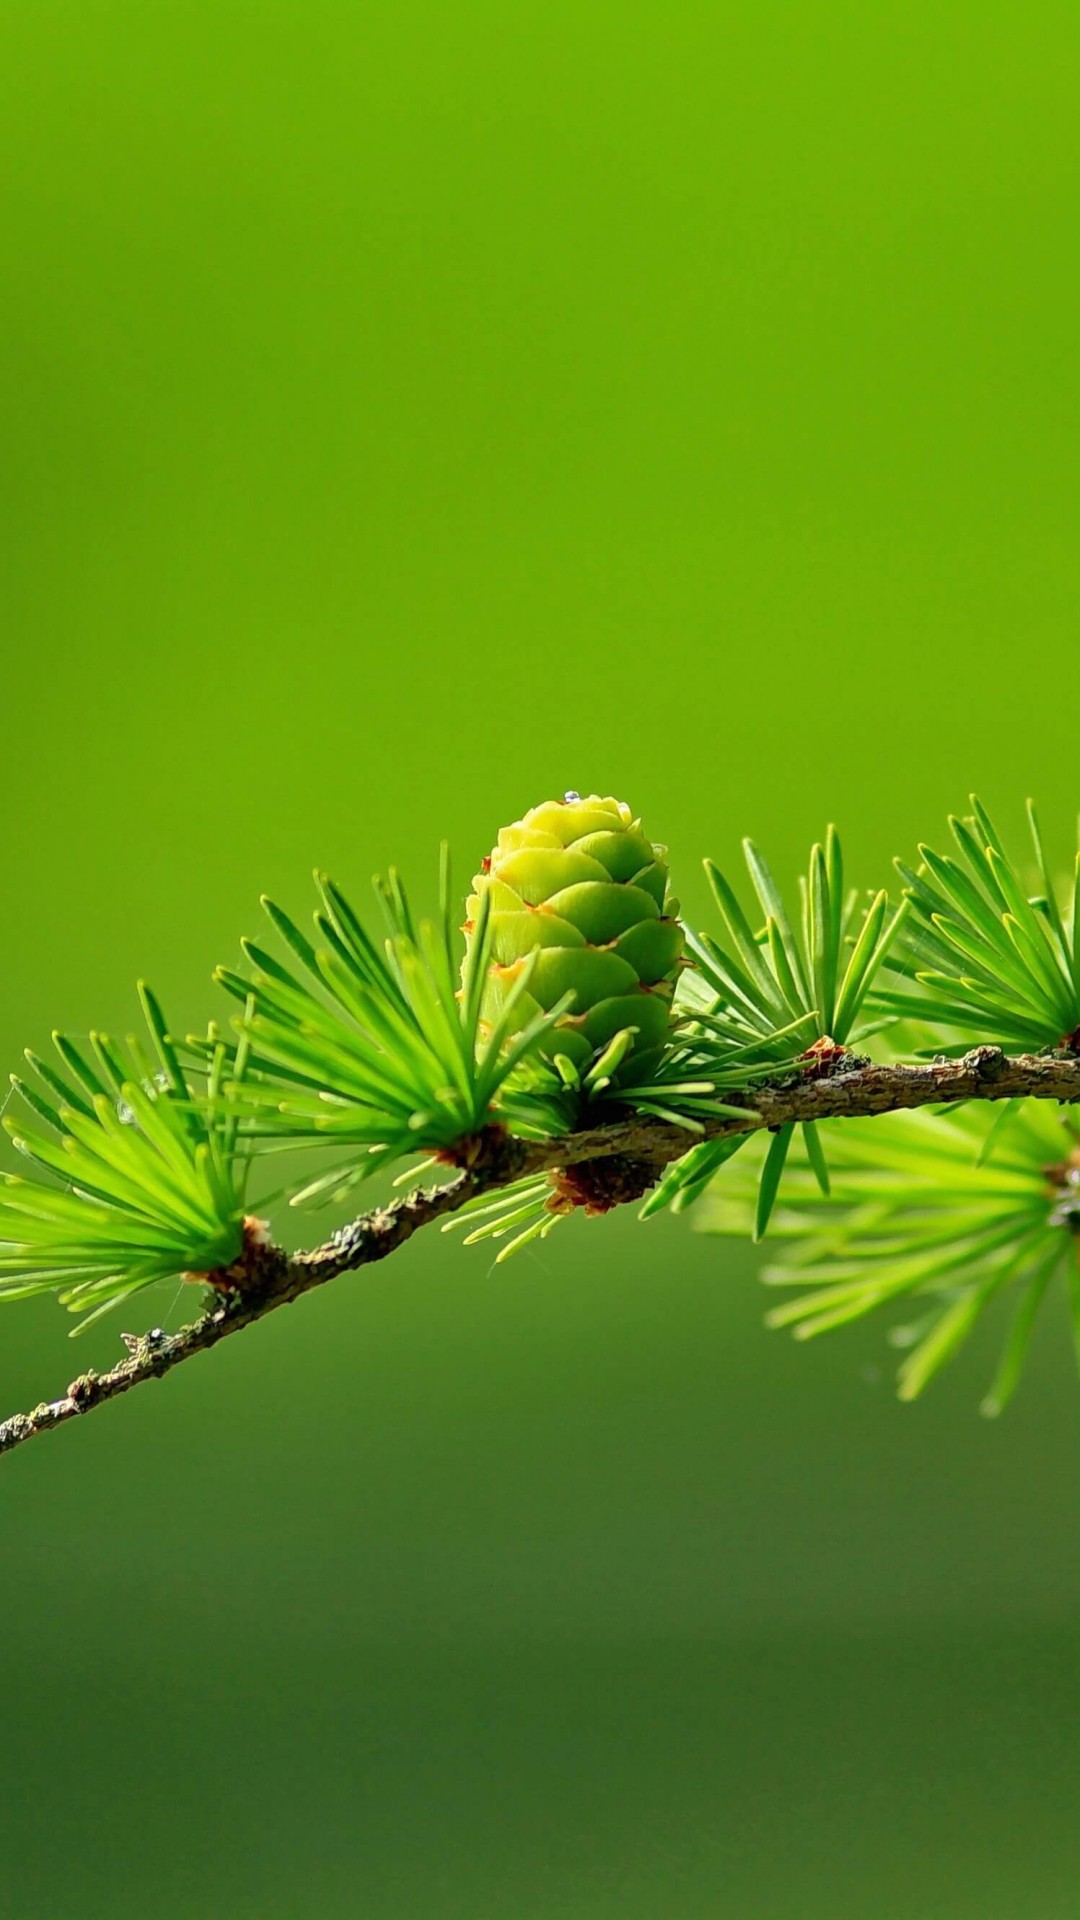 Branch of Pine Tree Wallpaper for SAMSUNG Galaxy Note 3